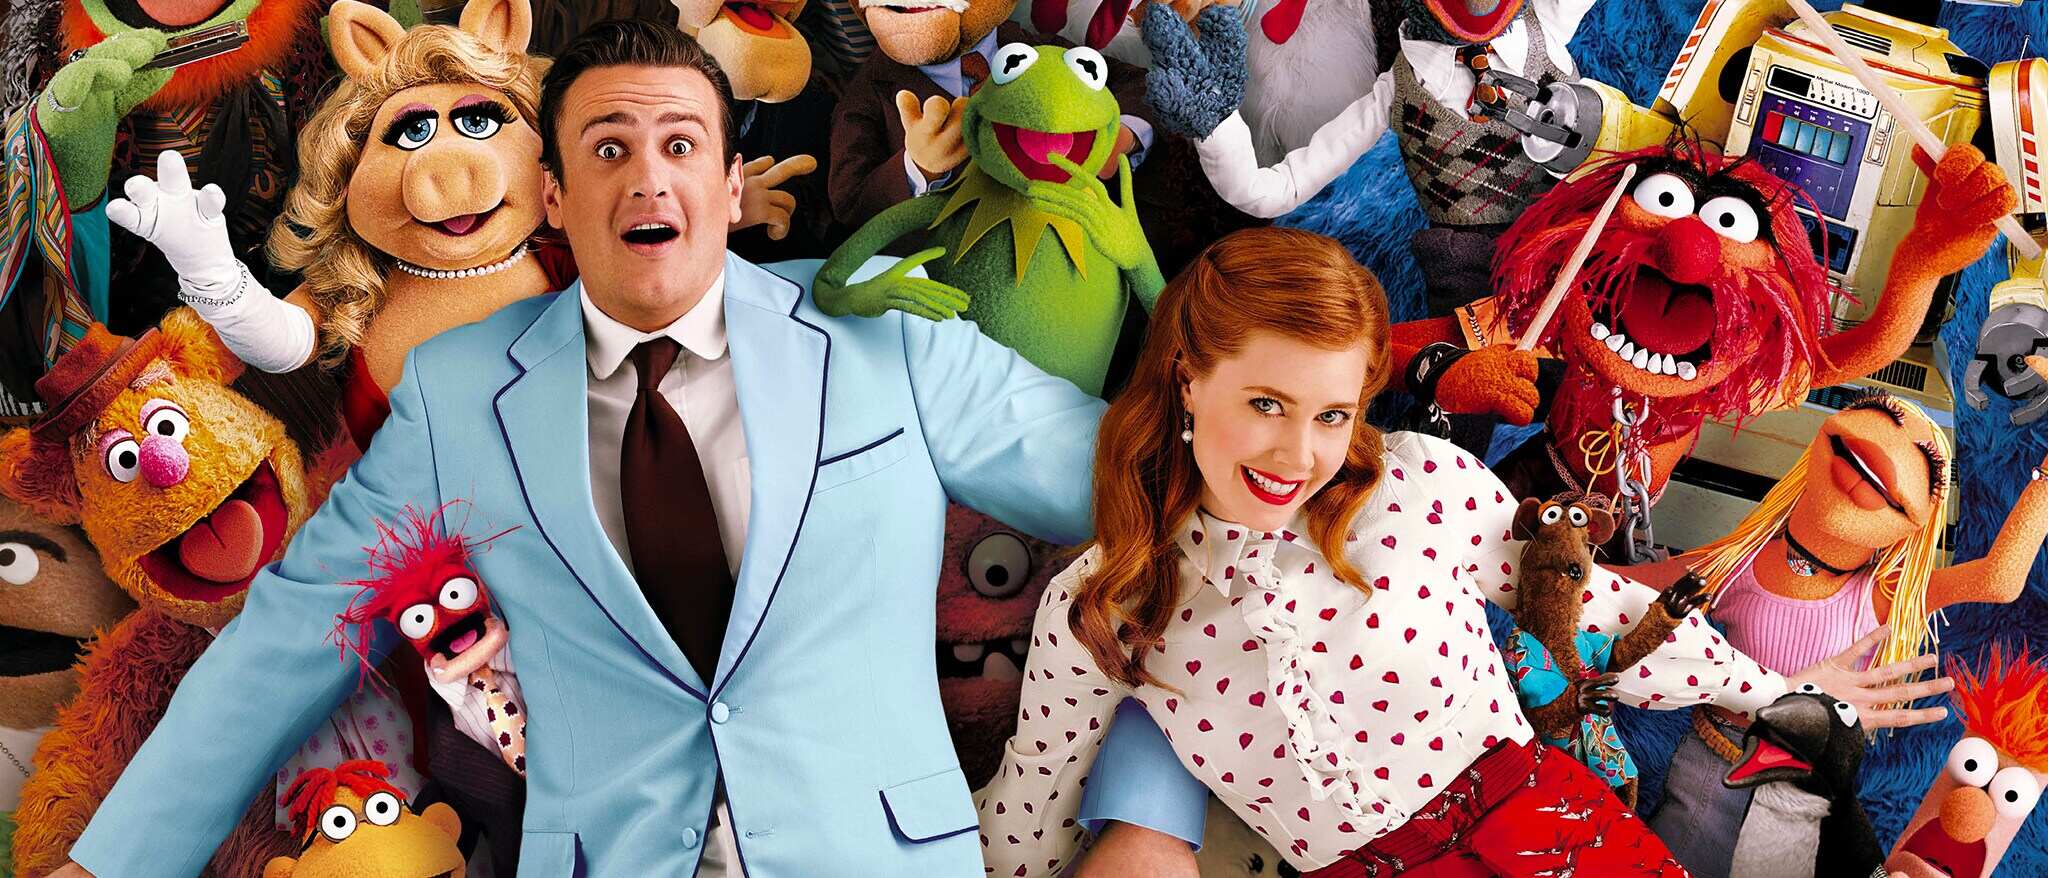 38-facts-about-the-movie-the-muppets